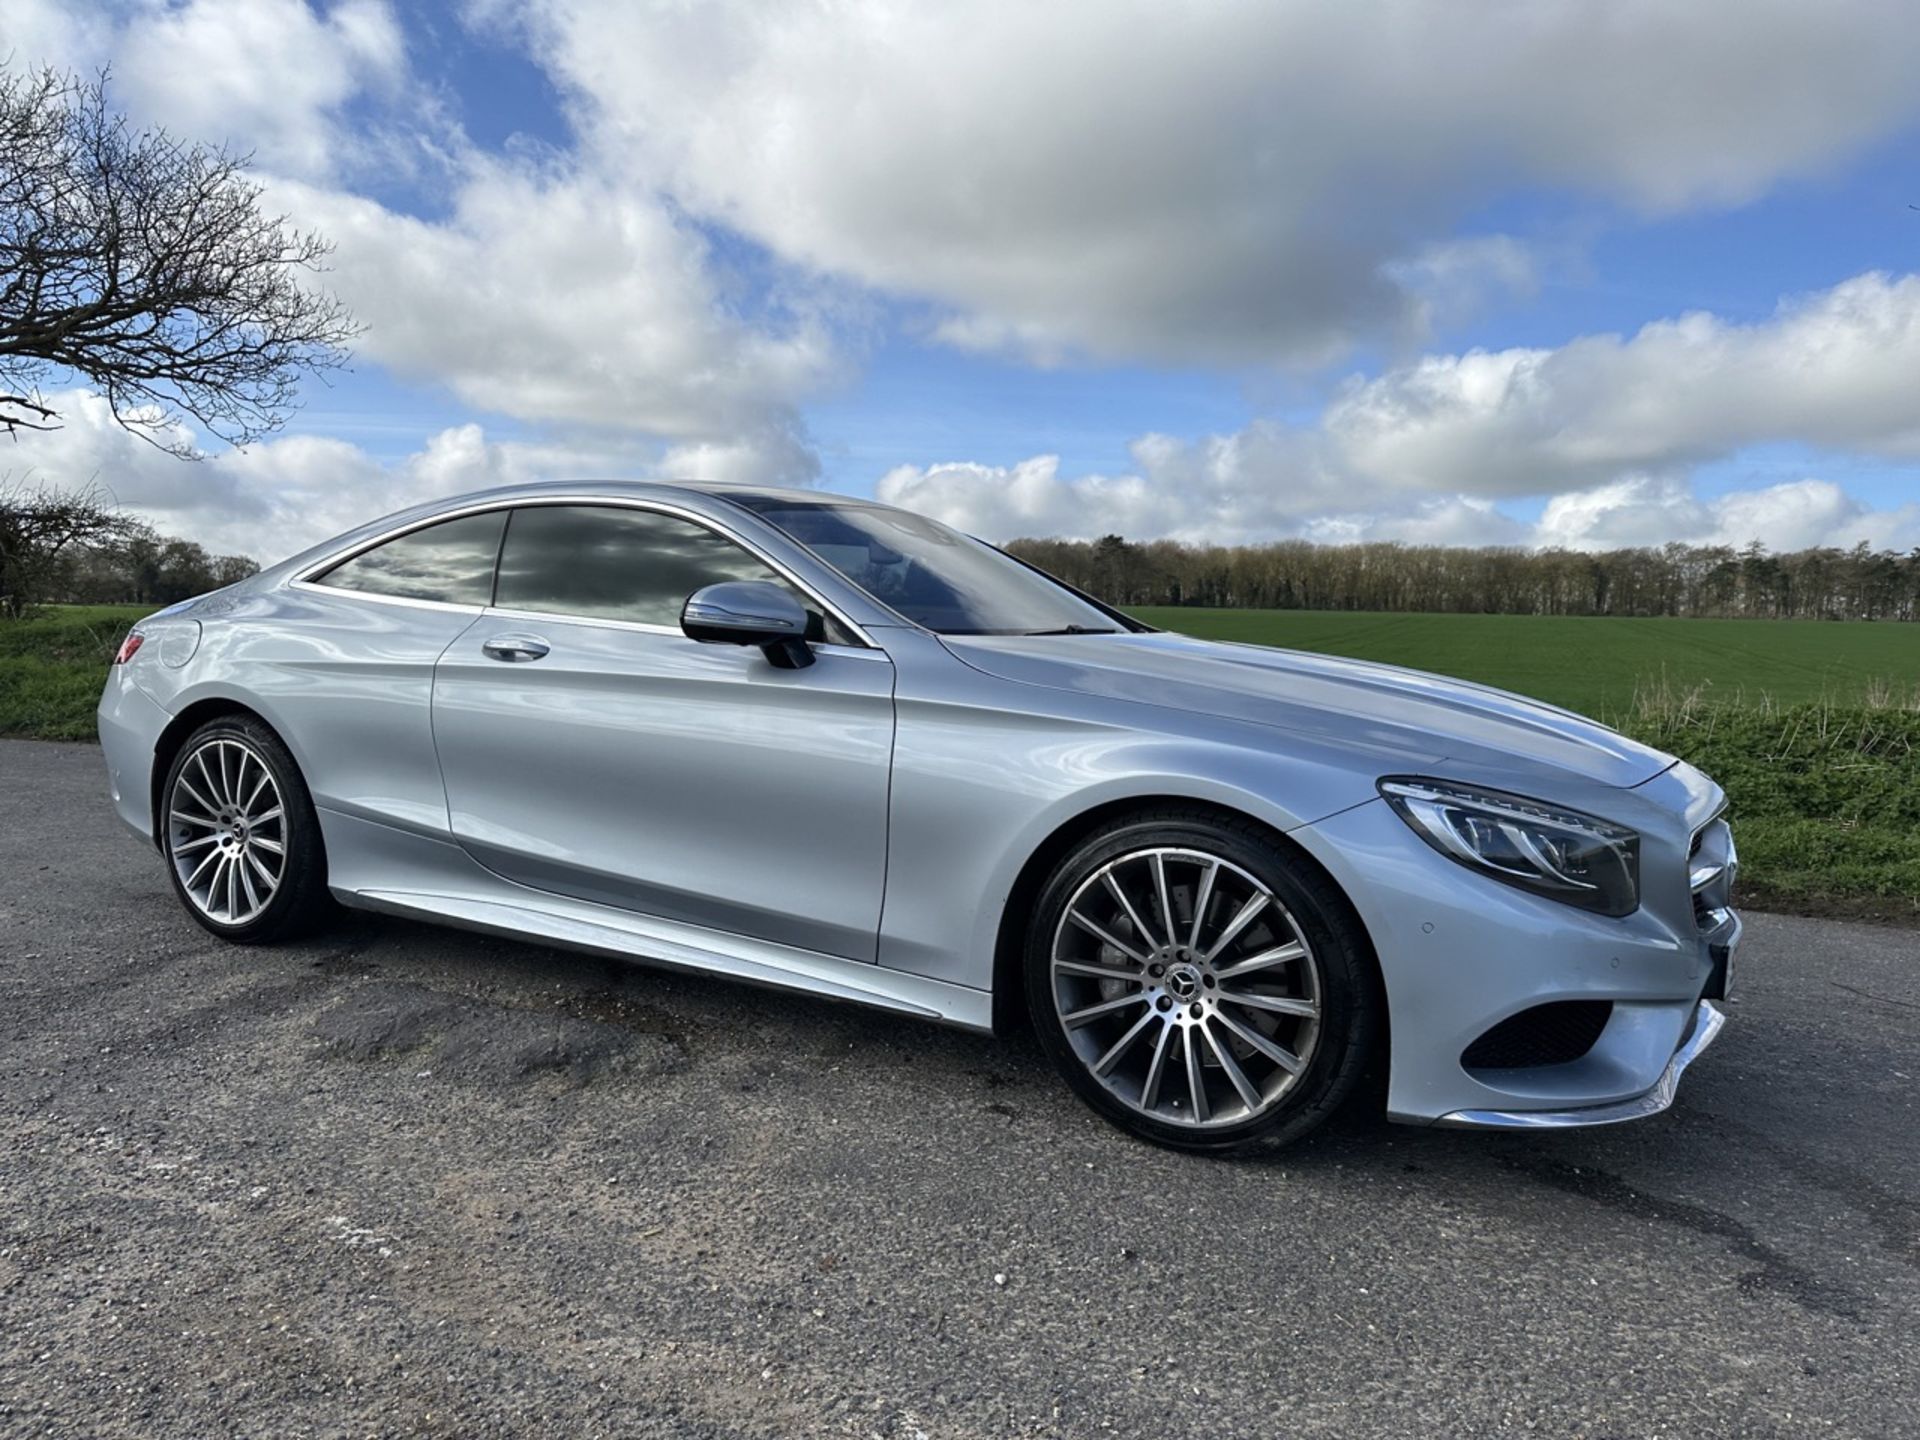 MERCEDES-BENZ S CLASS S500 AMG Line Premium 2dr Auto - Automatic - 2018 - Coupe - 88K miles Full SH - Image 16 of 30